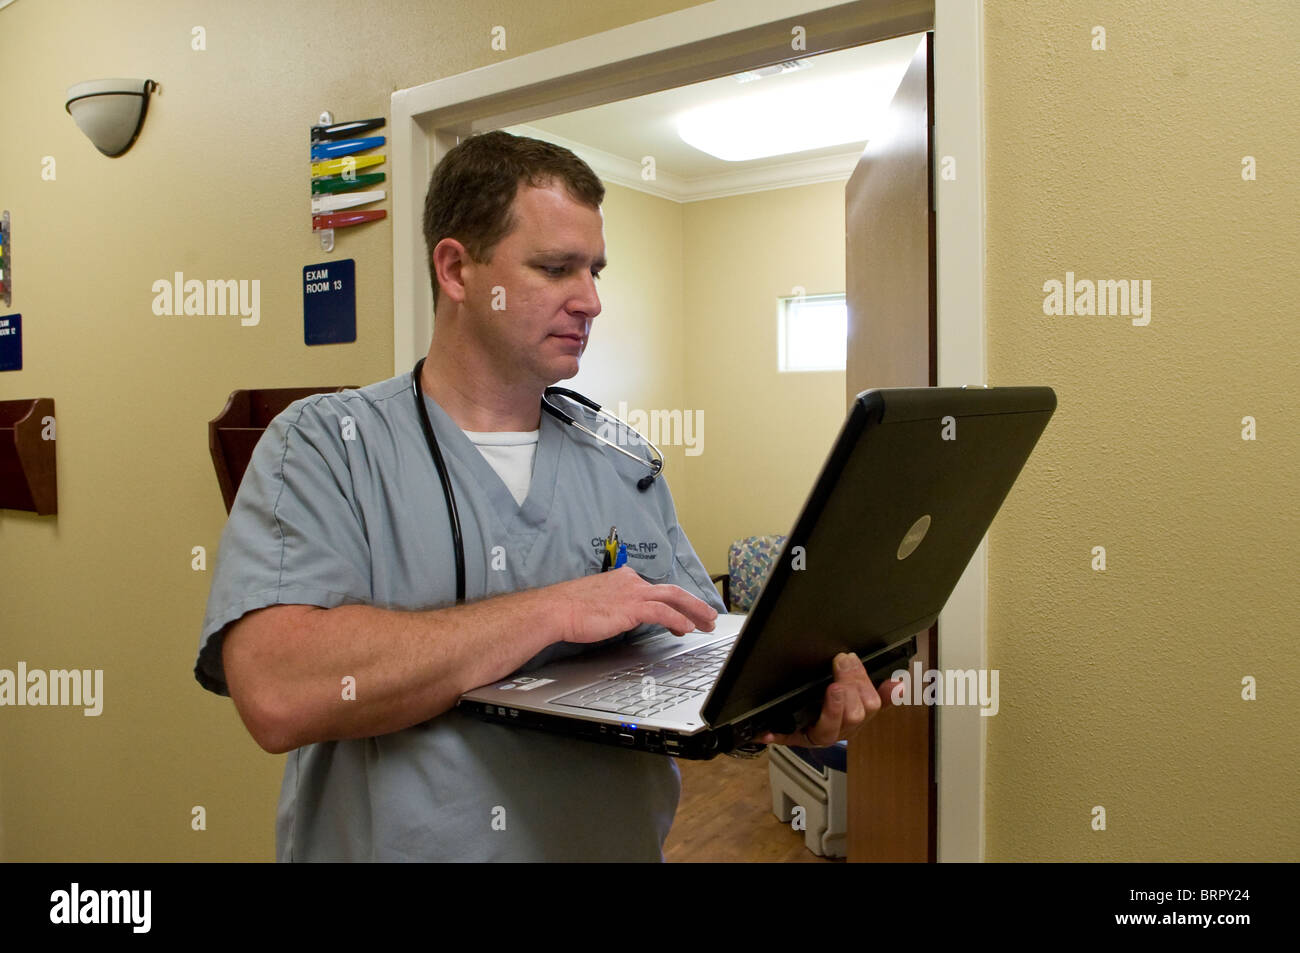 Male nurse practitioner  in Victoria, Texas reviews patient information on laptop computer before entering examining room. Stock Photo